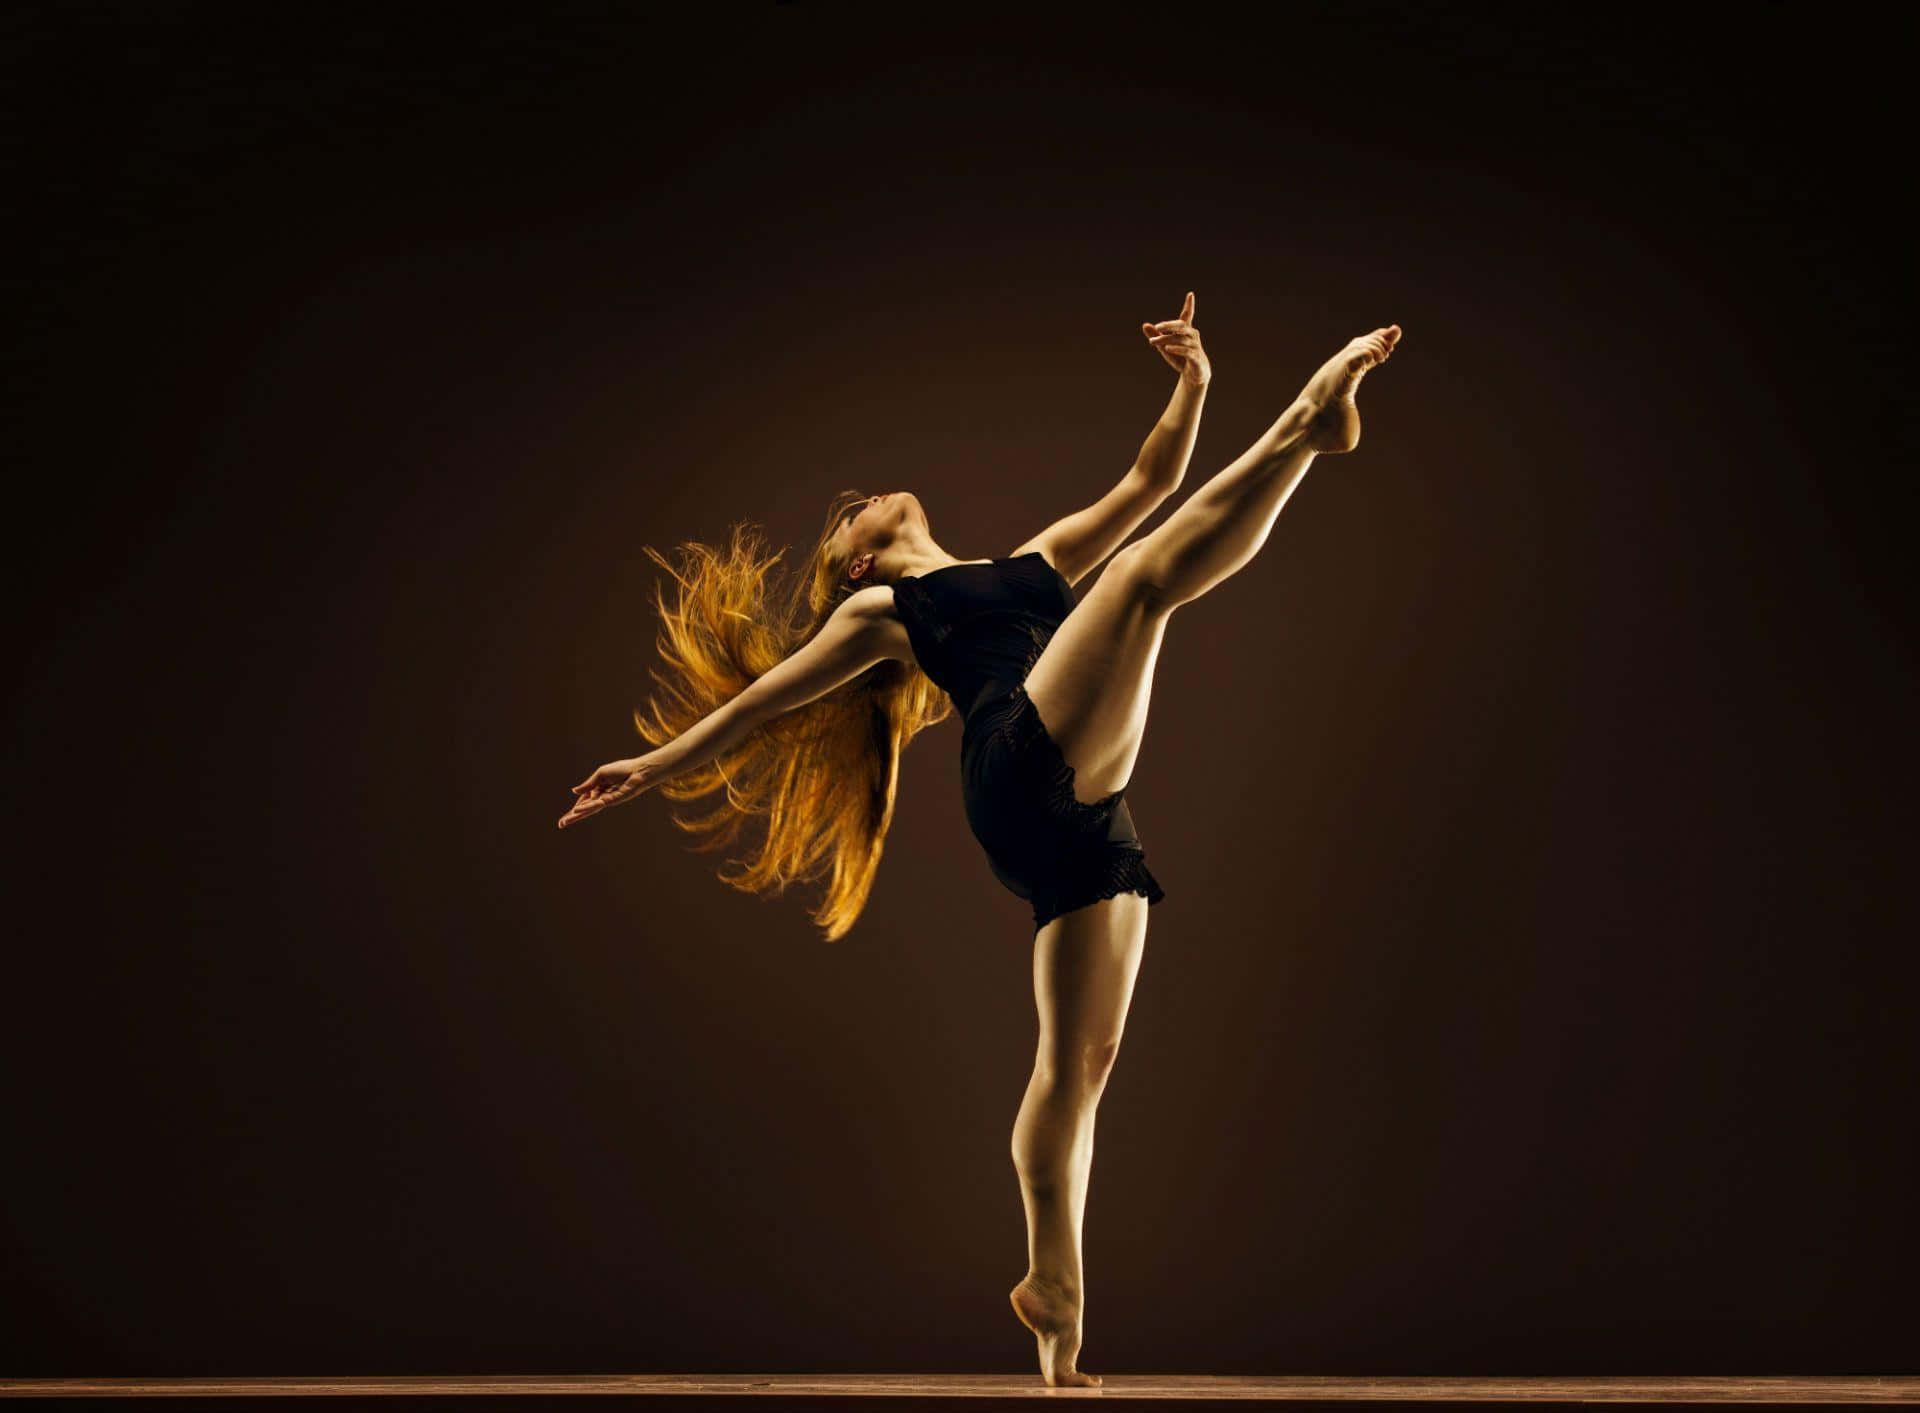 A Young Dancer Is Doing A Pose On A Dark Background